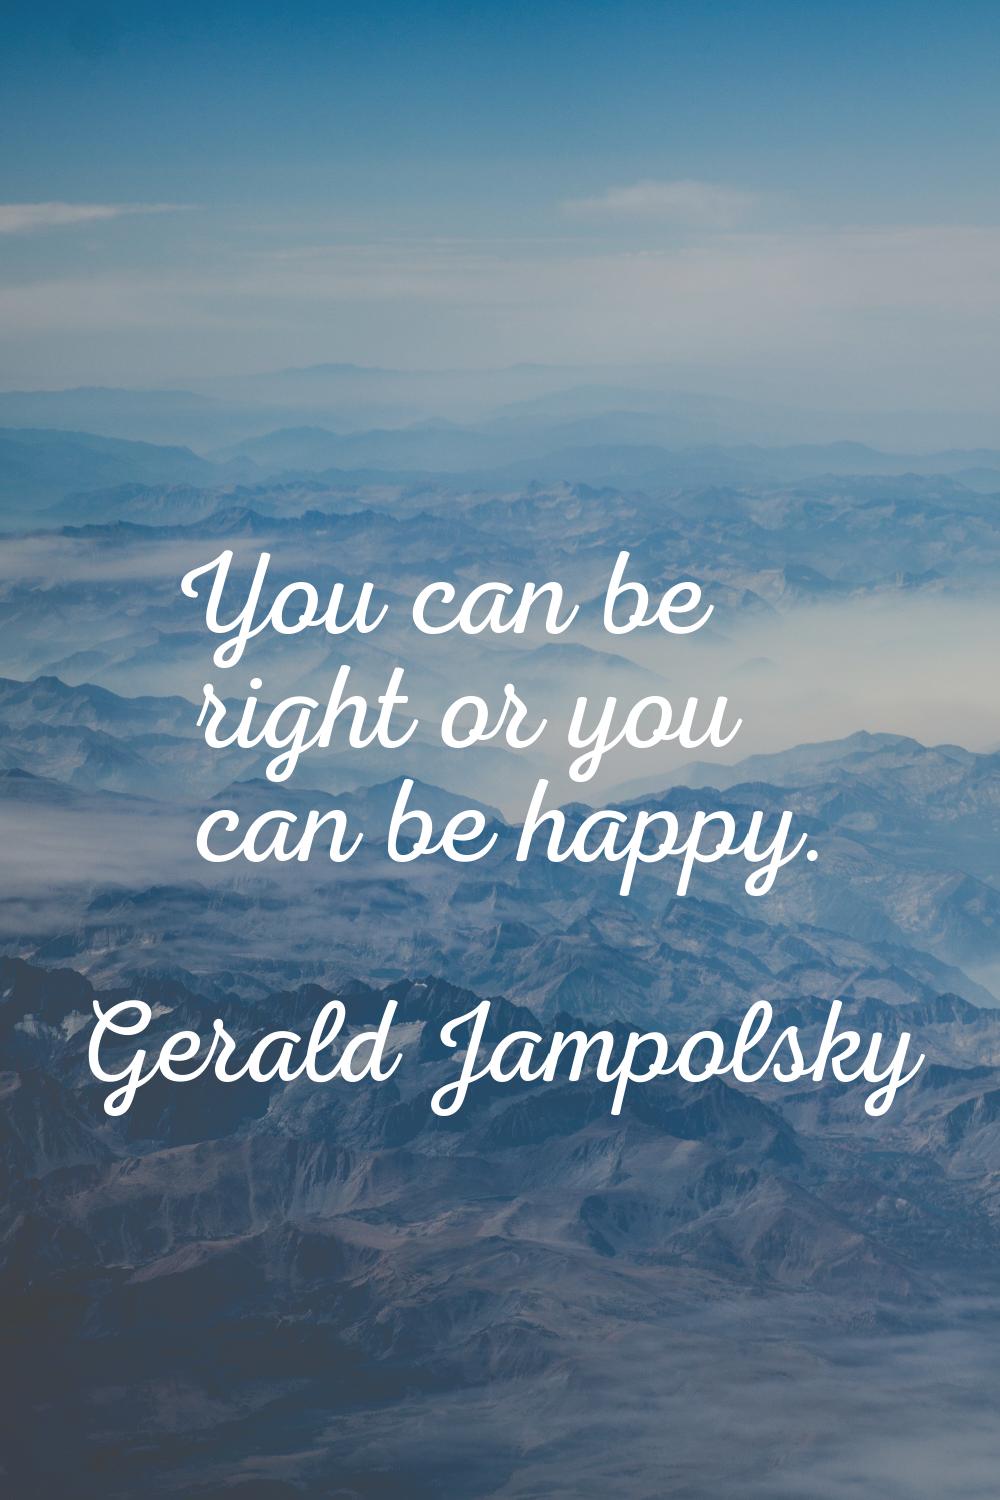 You can be right or you can be happy.